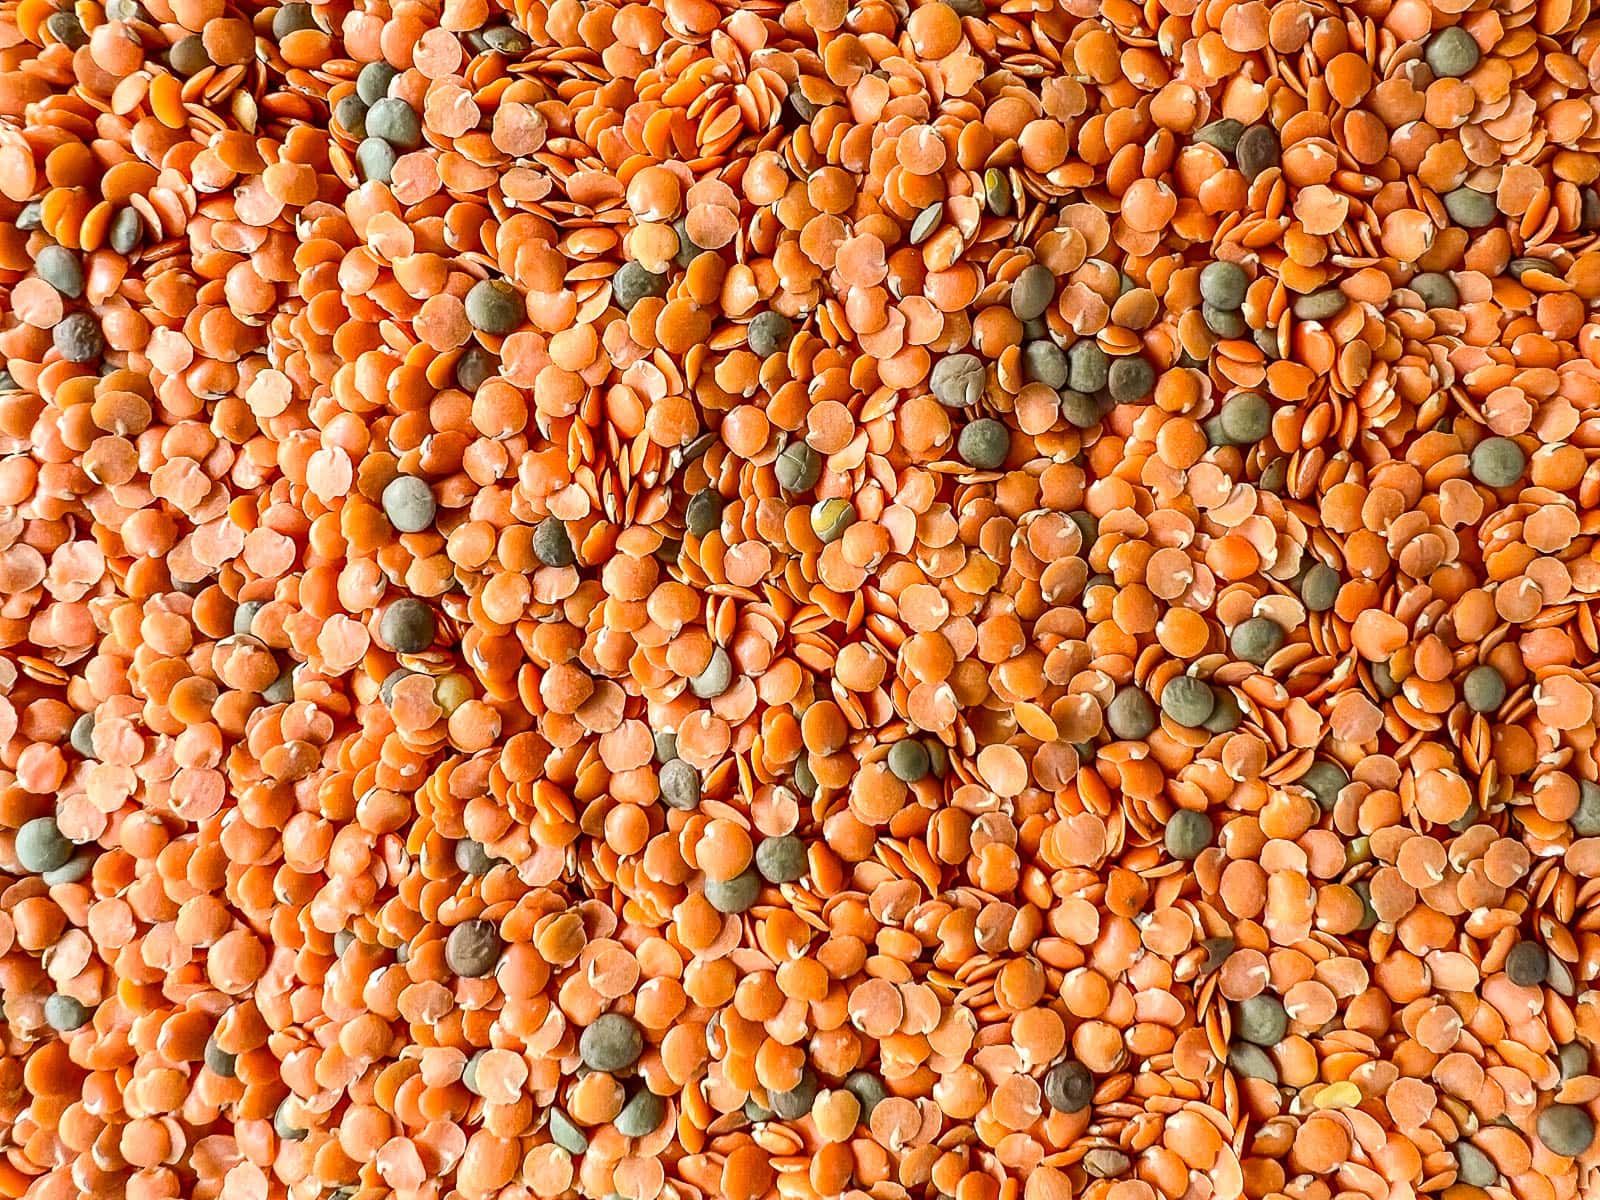 Red lentils with some green lentils throughout spread across a table.